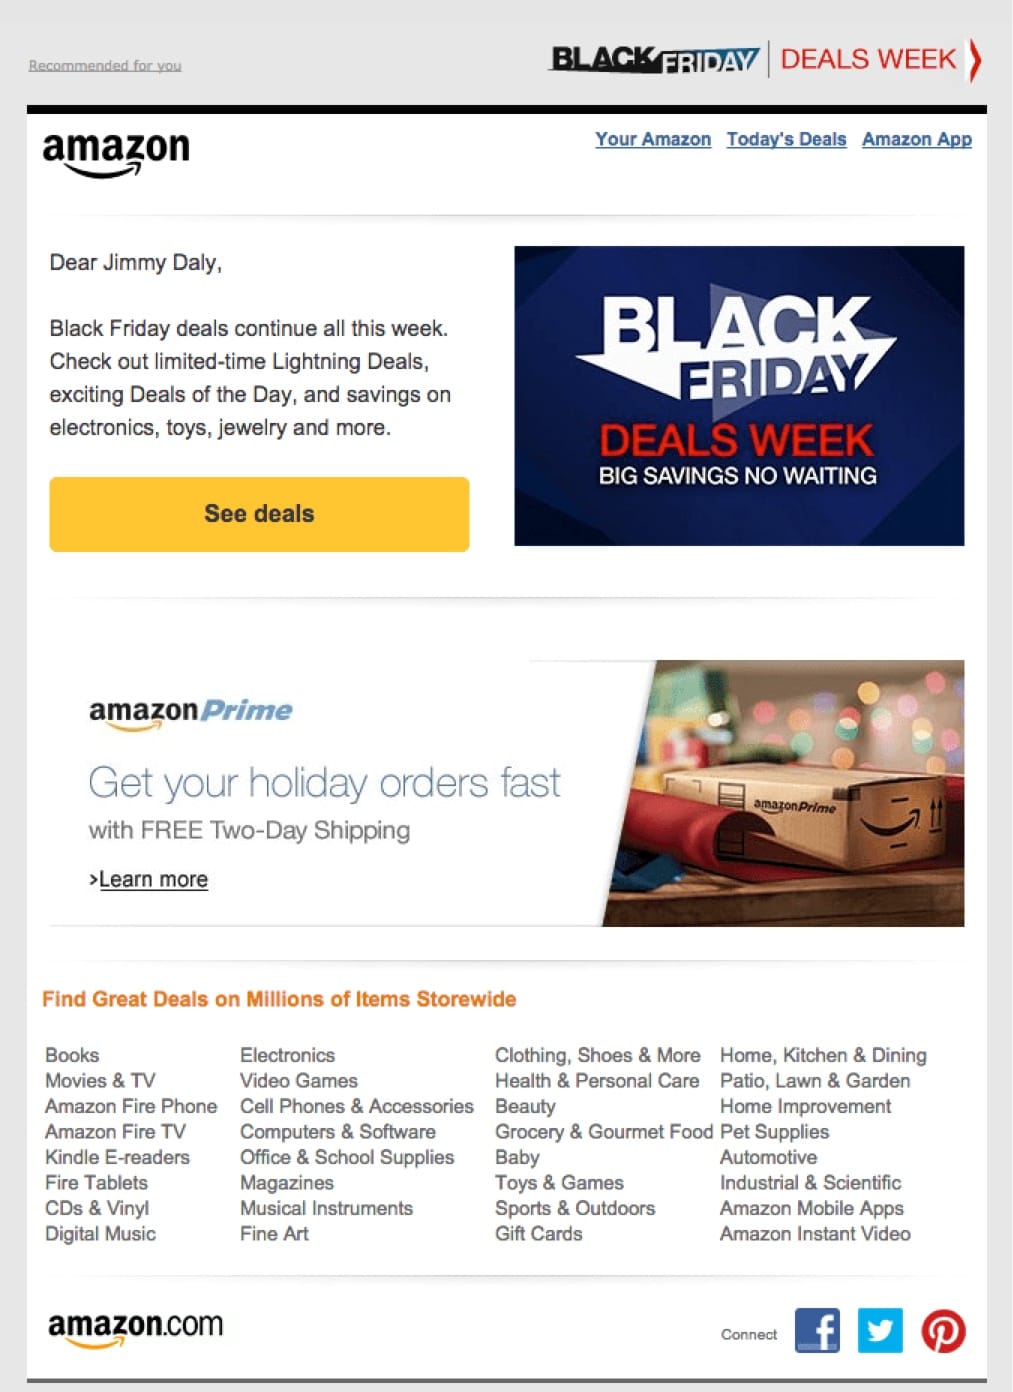 email example amazon (holiday offer)